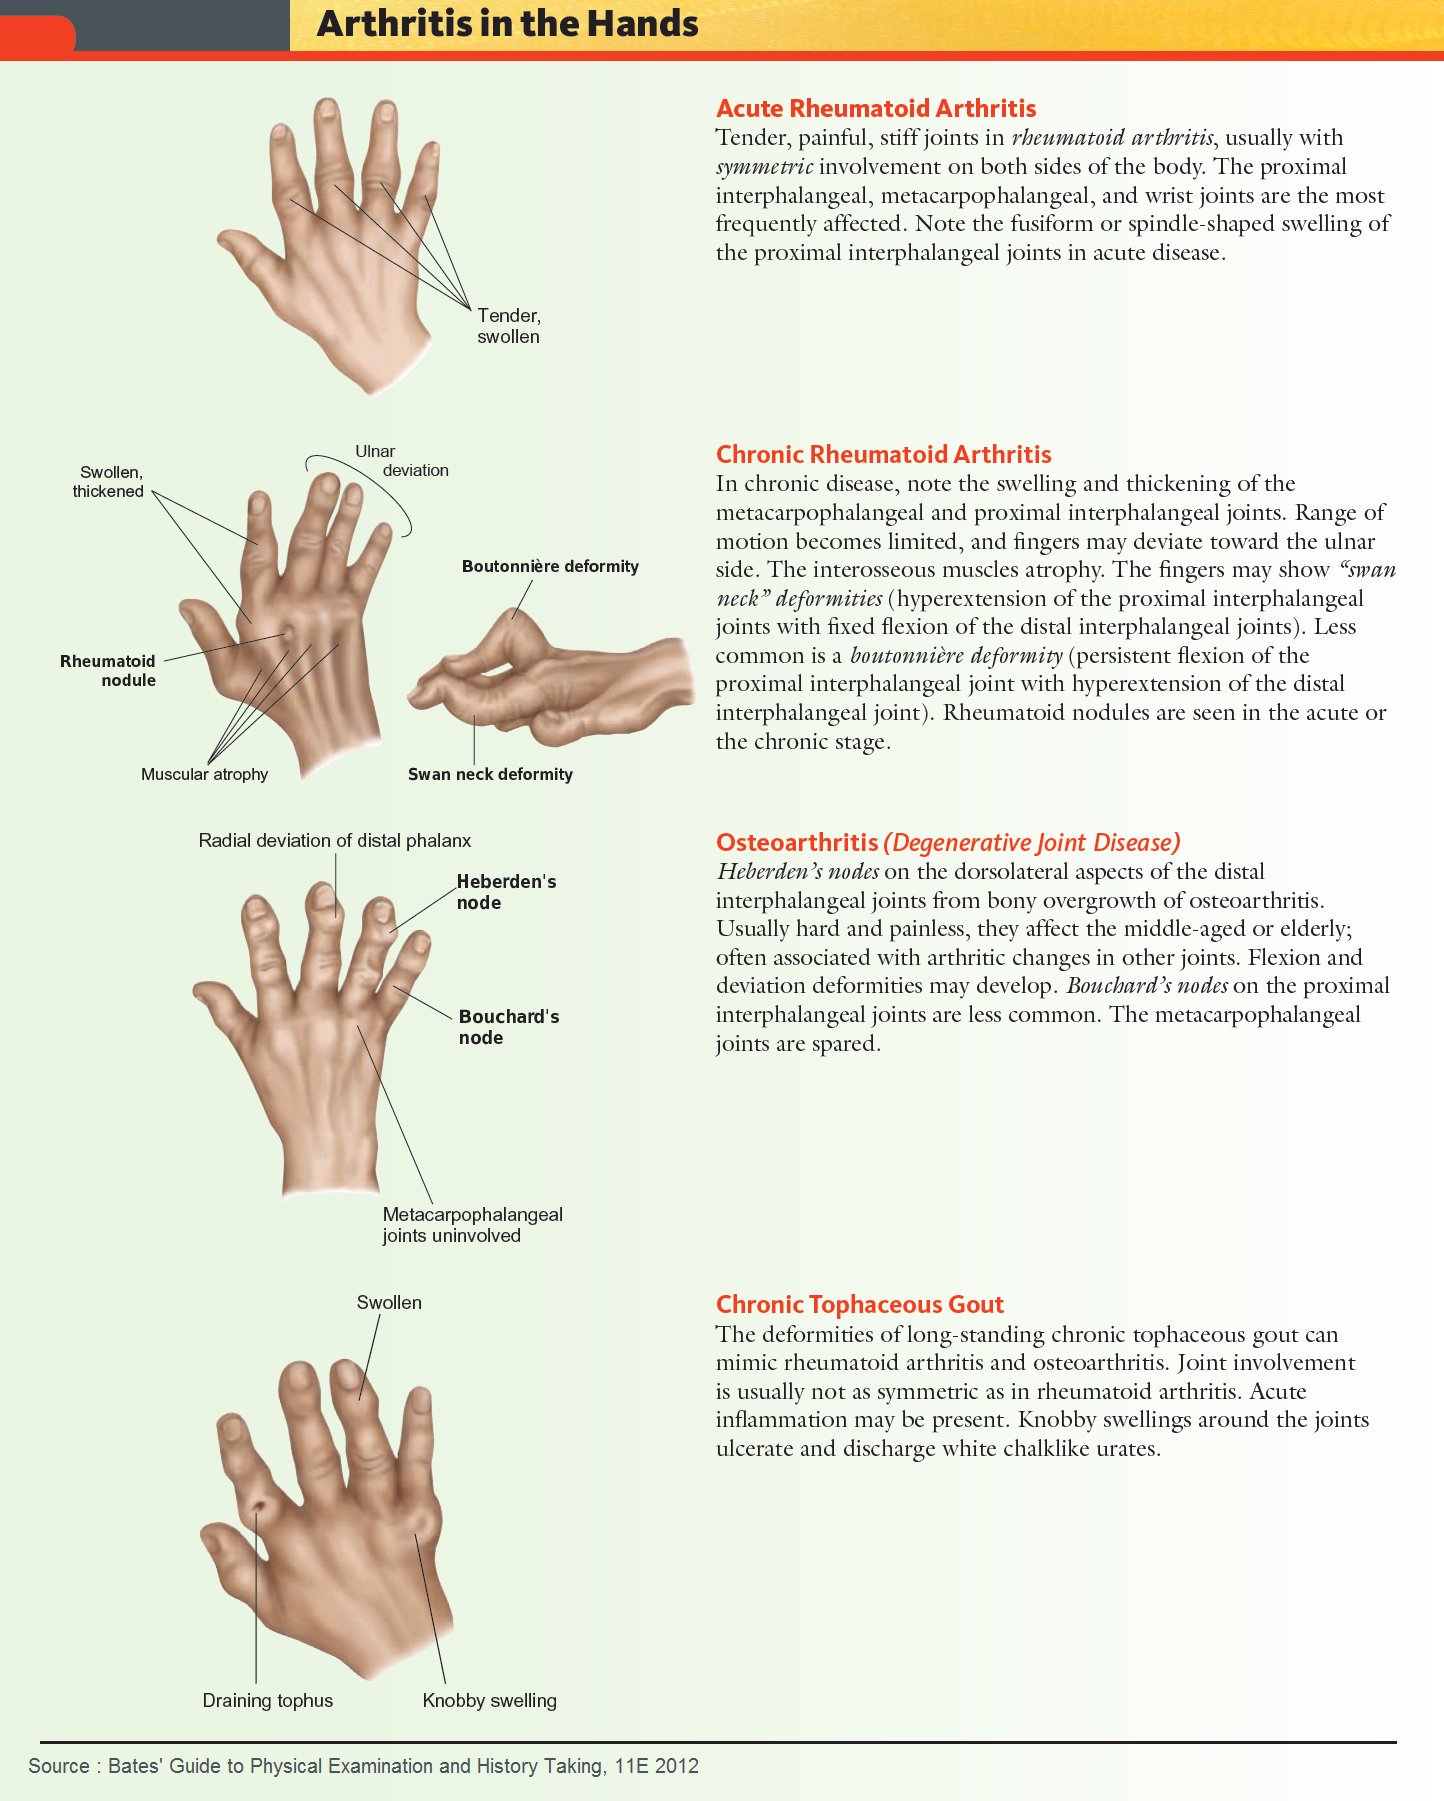 44+ What Are The Symptoms Of Rheumatoid Arthritis In The Hands ...